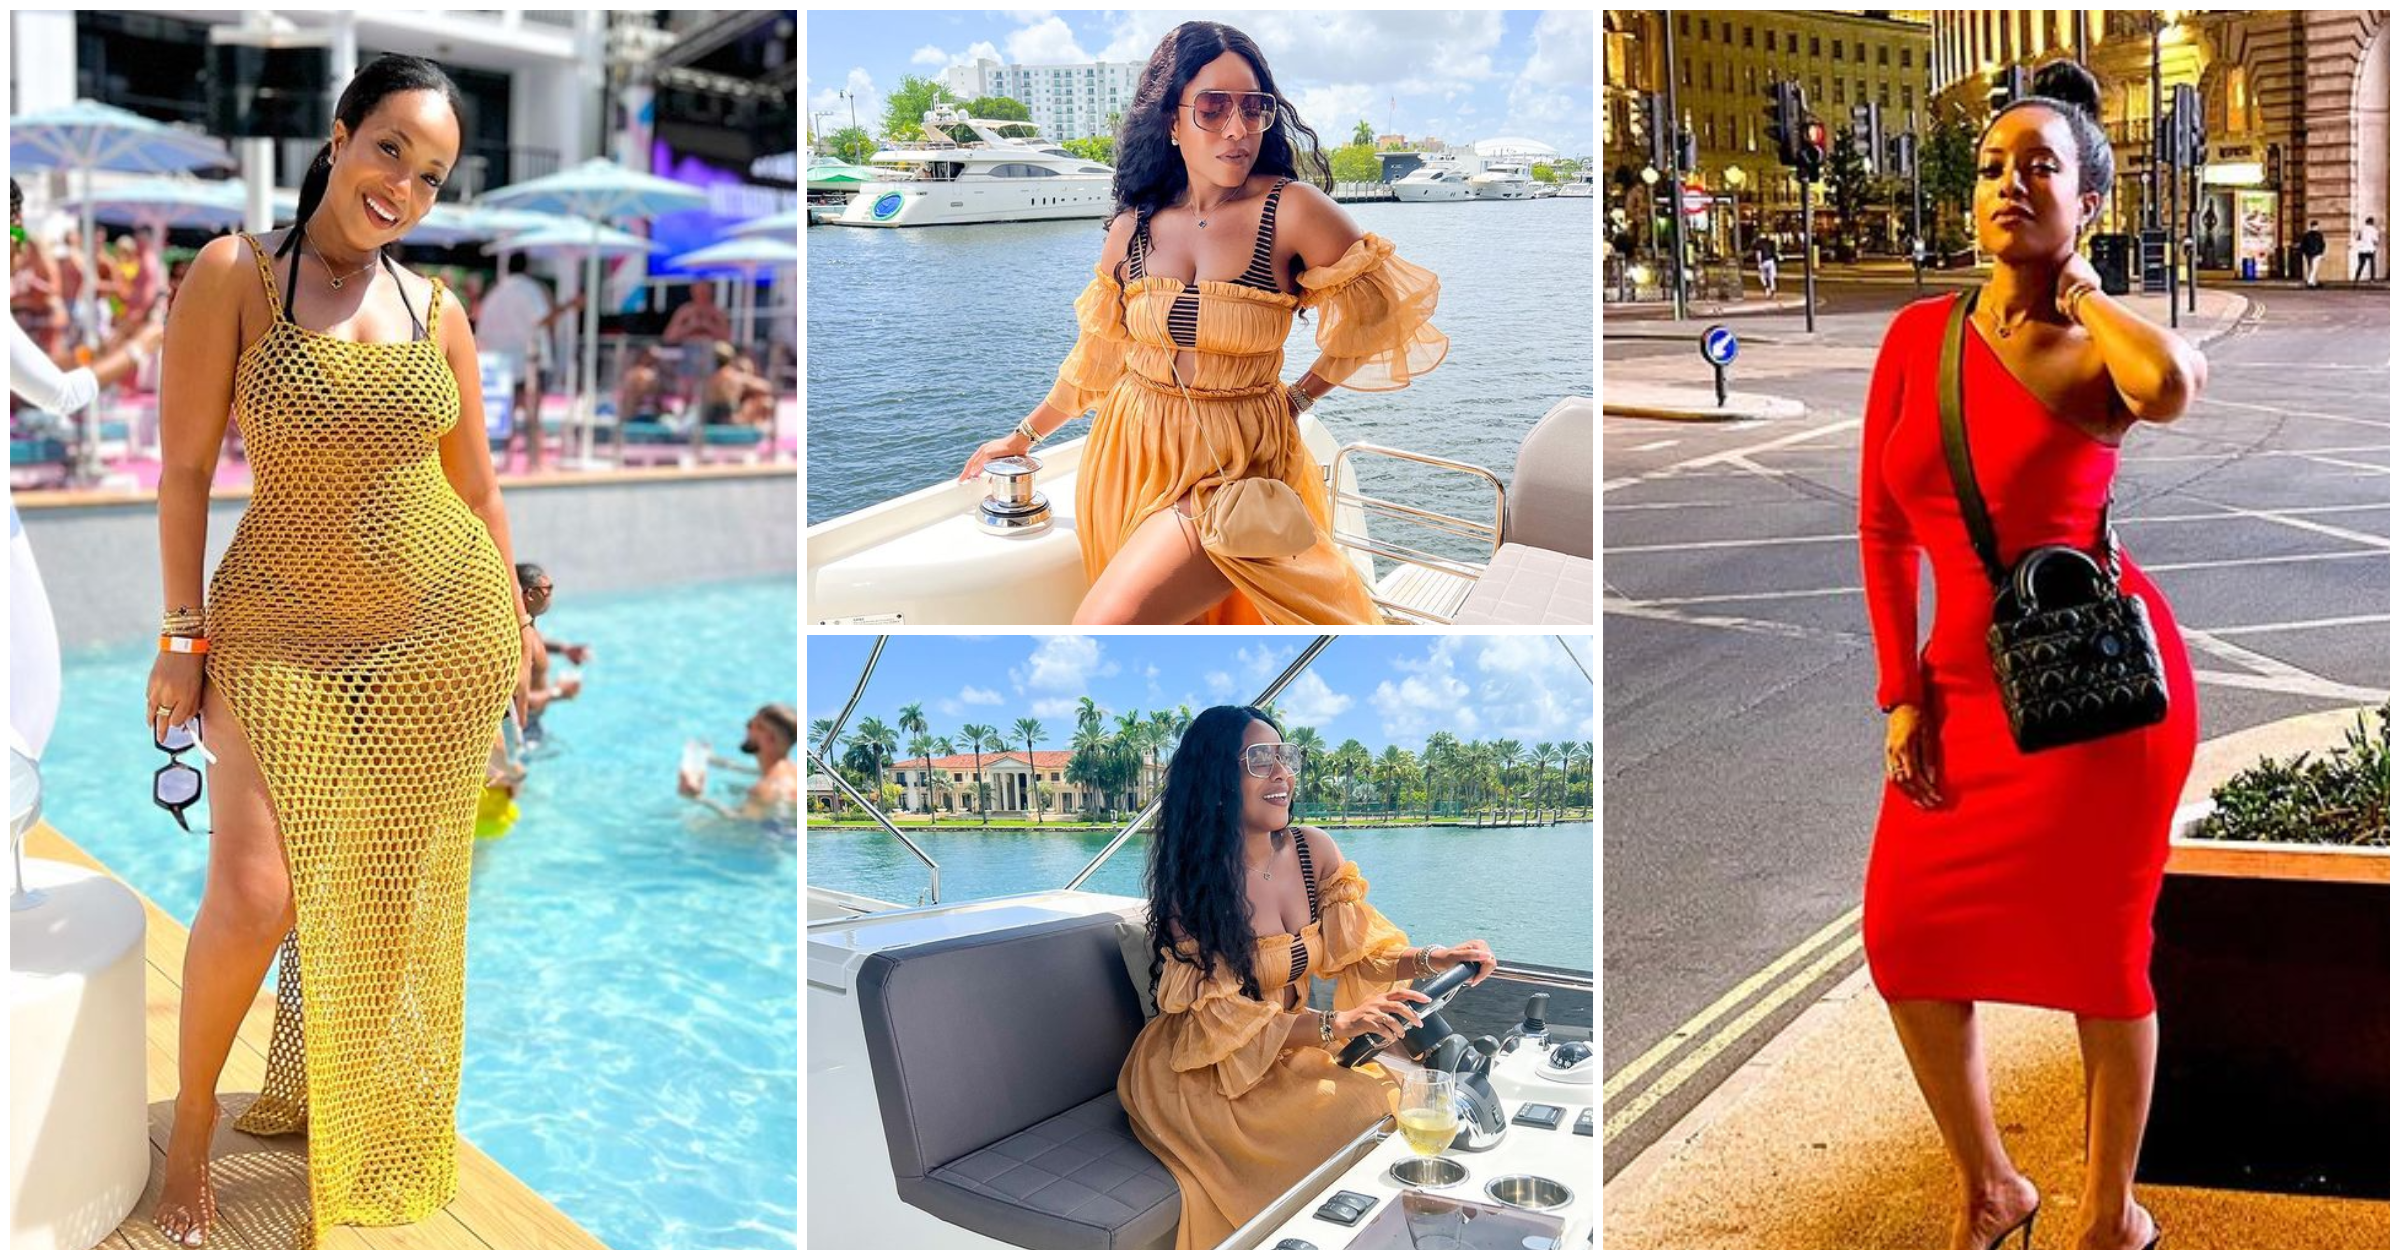 Joselyn Dumas celebrates 42nd birthday, photos of her cruising on a boat in Miami pop up